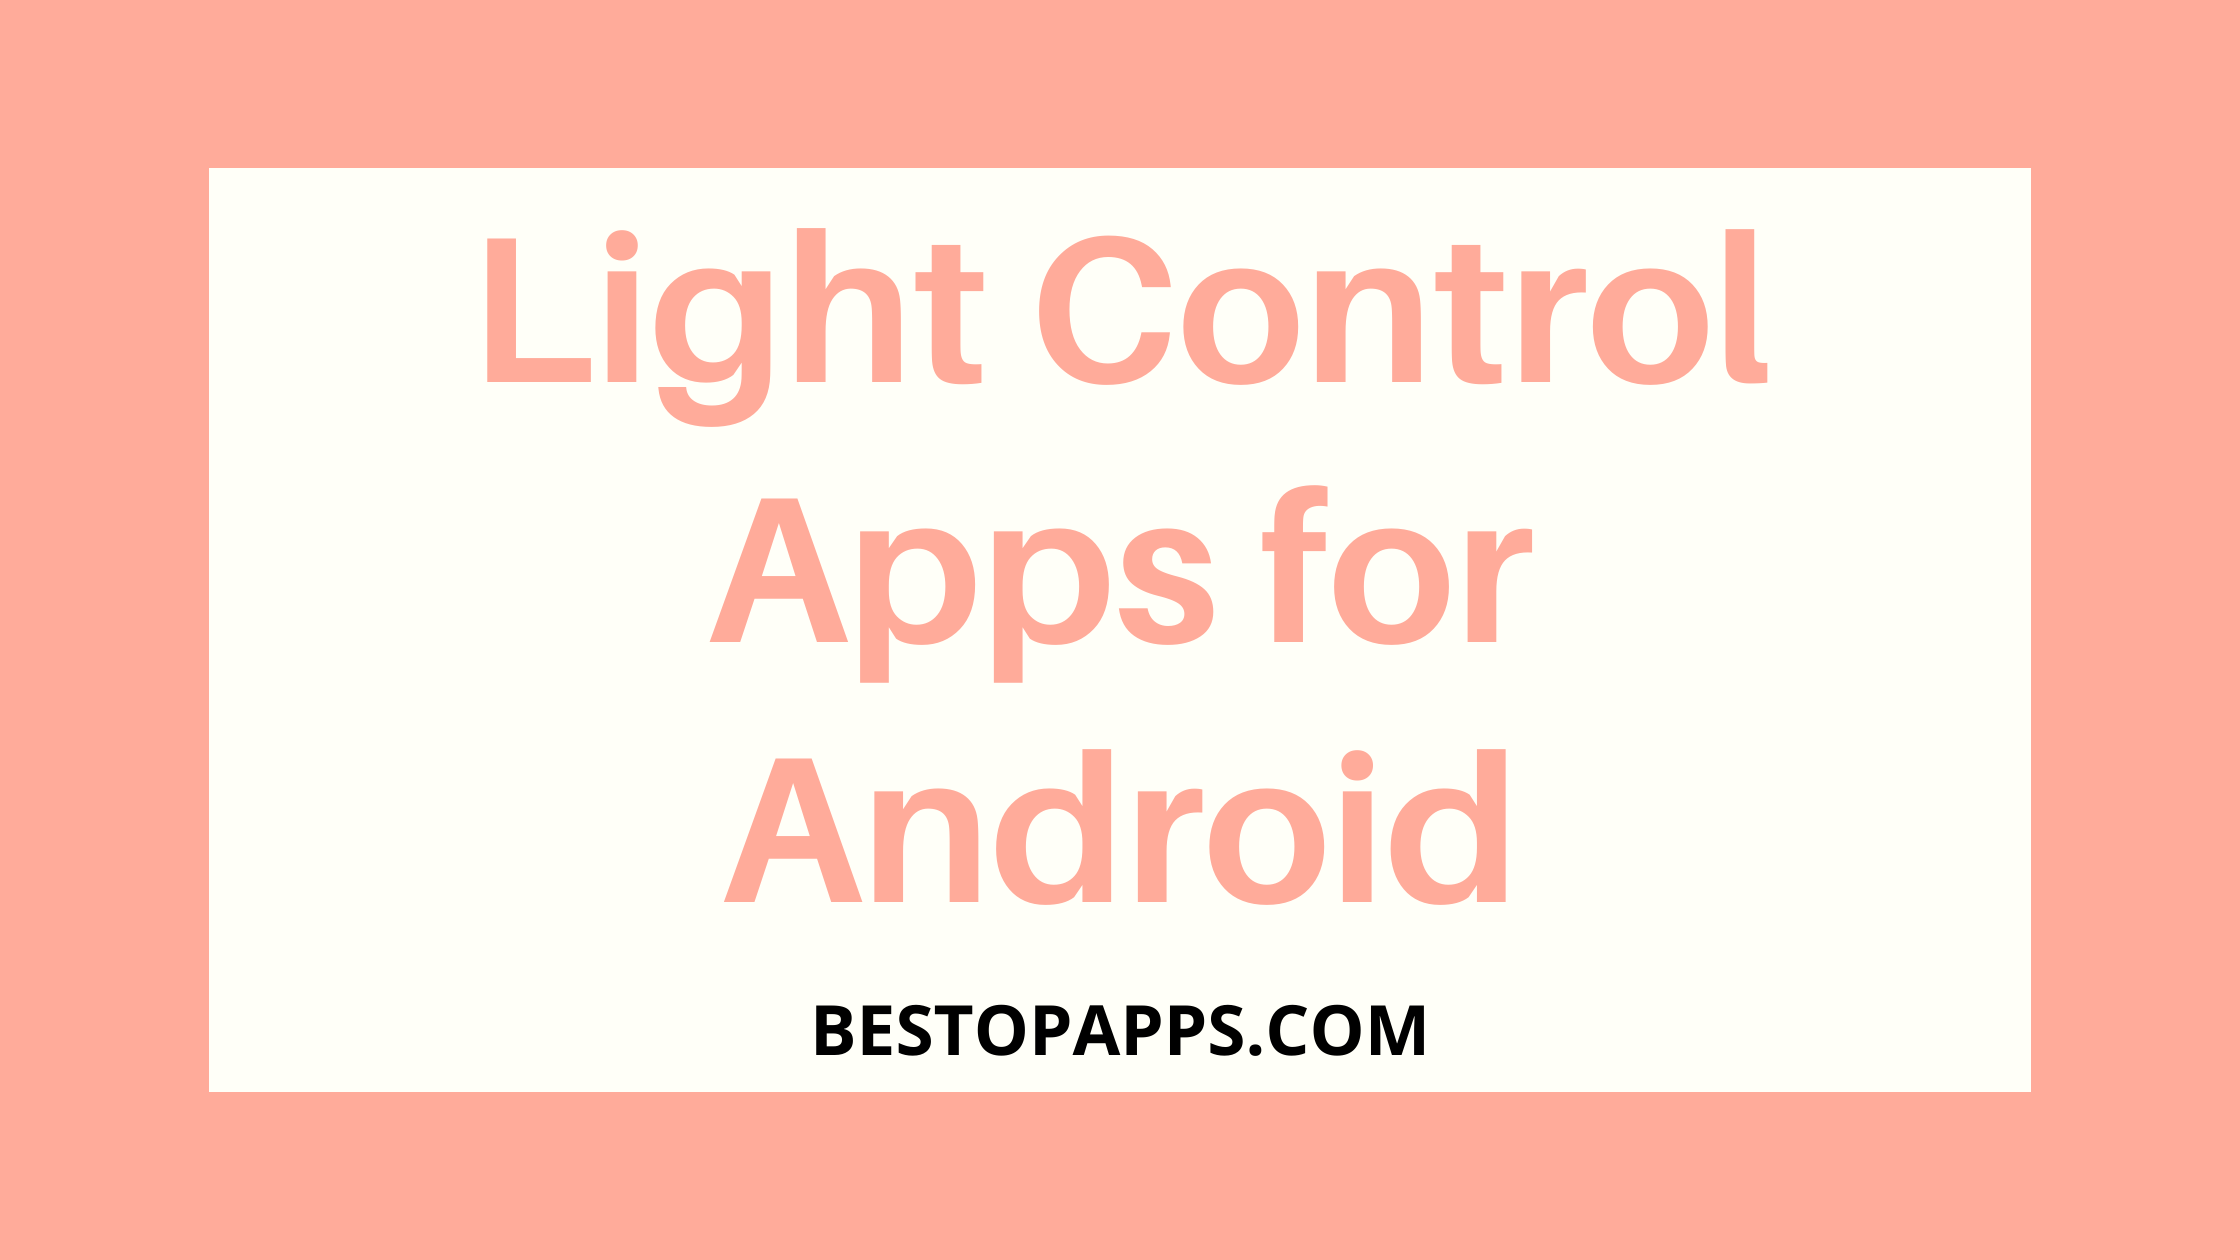 Light Control Apps for Android